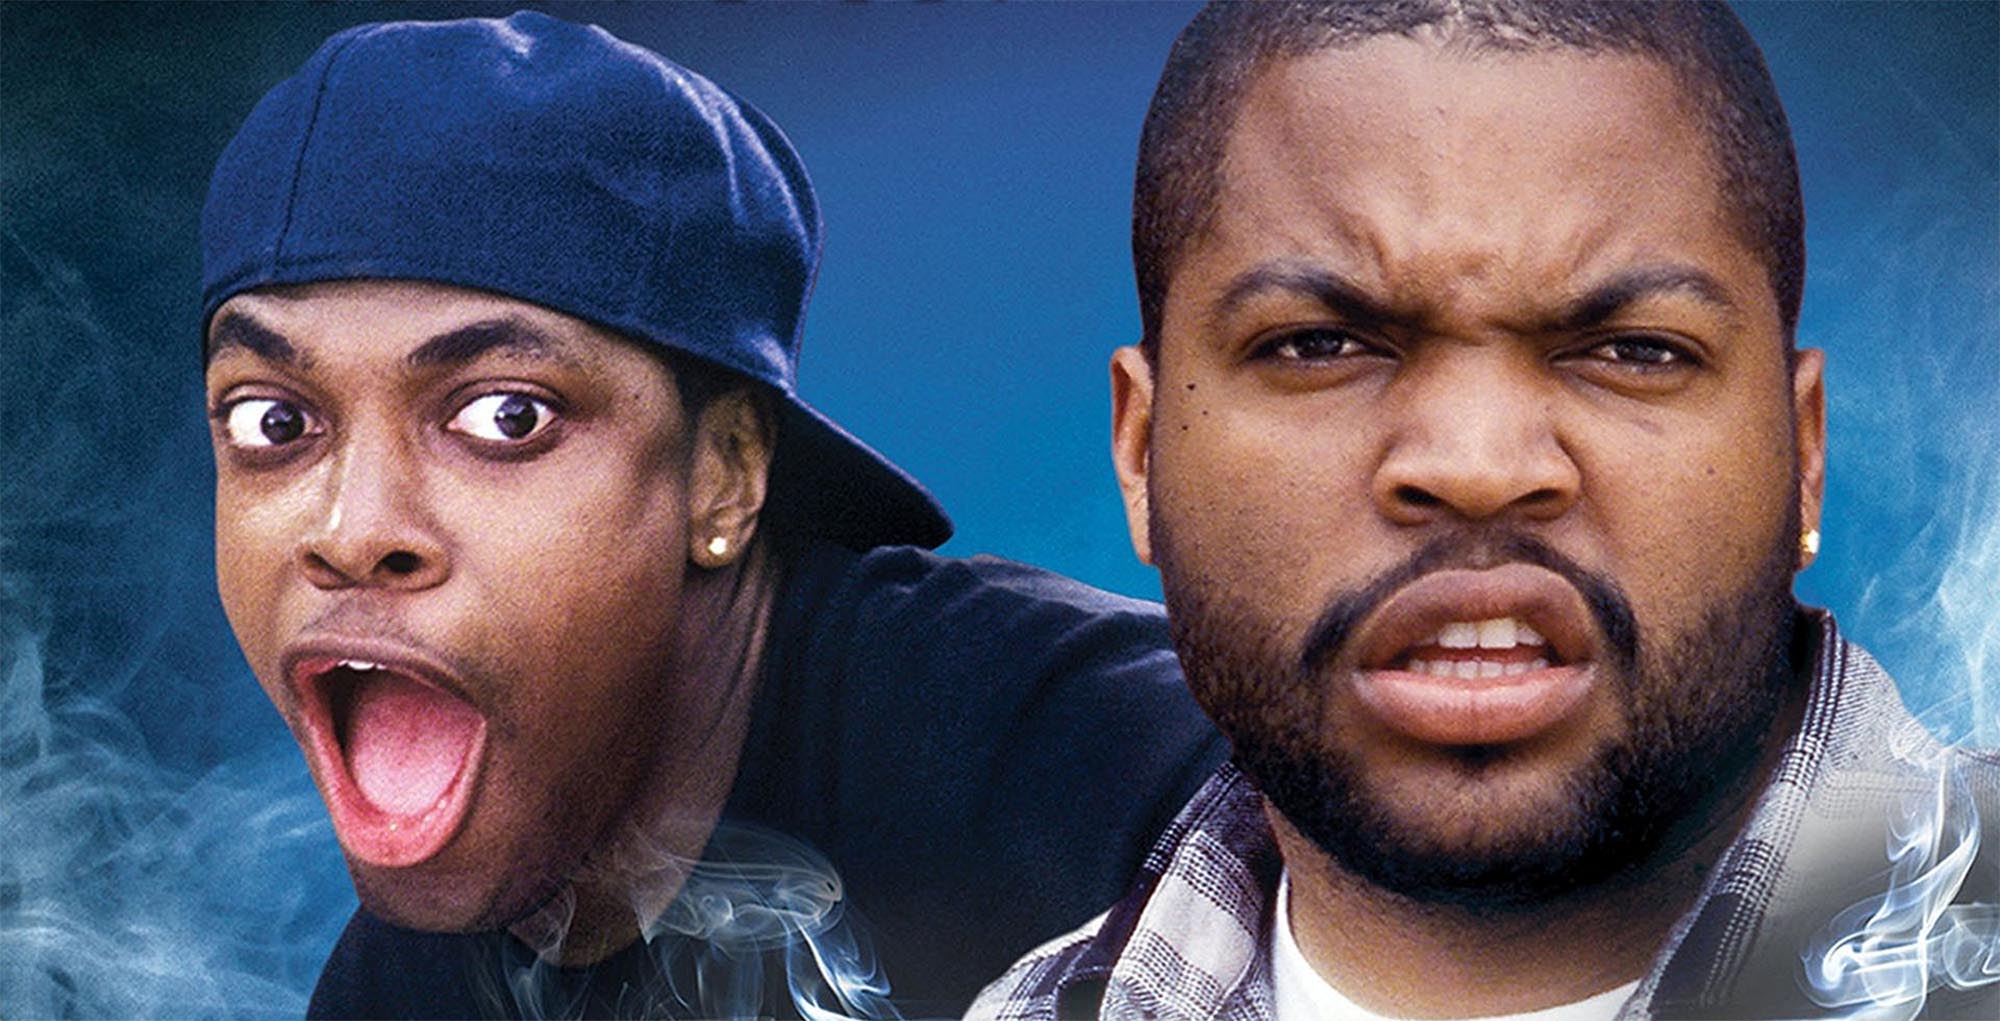 In celebration of 'Roxanne Roxanne’'s release, we’re taking a look at some of the greatest (and some of the not-so-great) hip hop movies of all time.